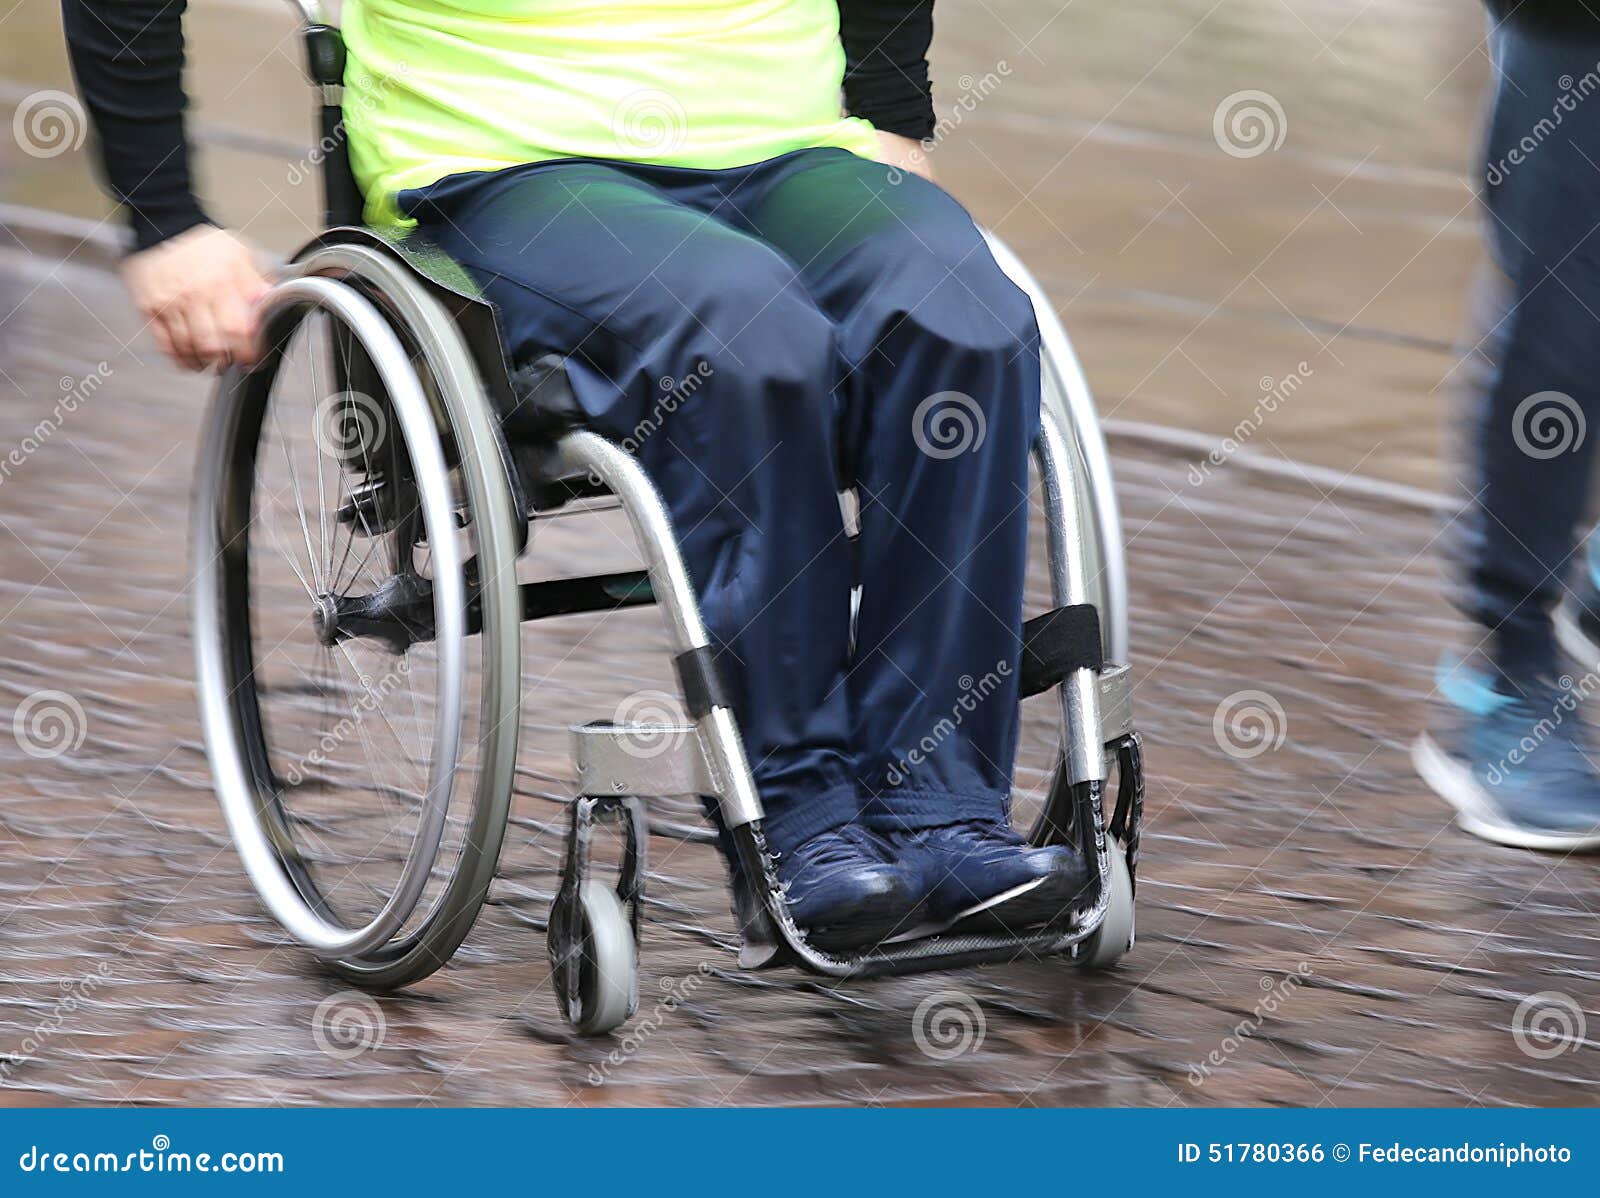 disabled athlete with the wheelchair during a competition